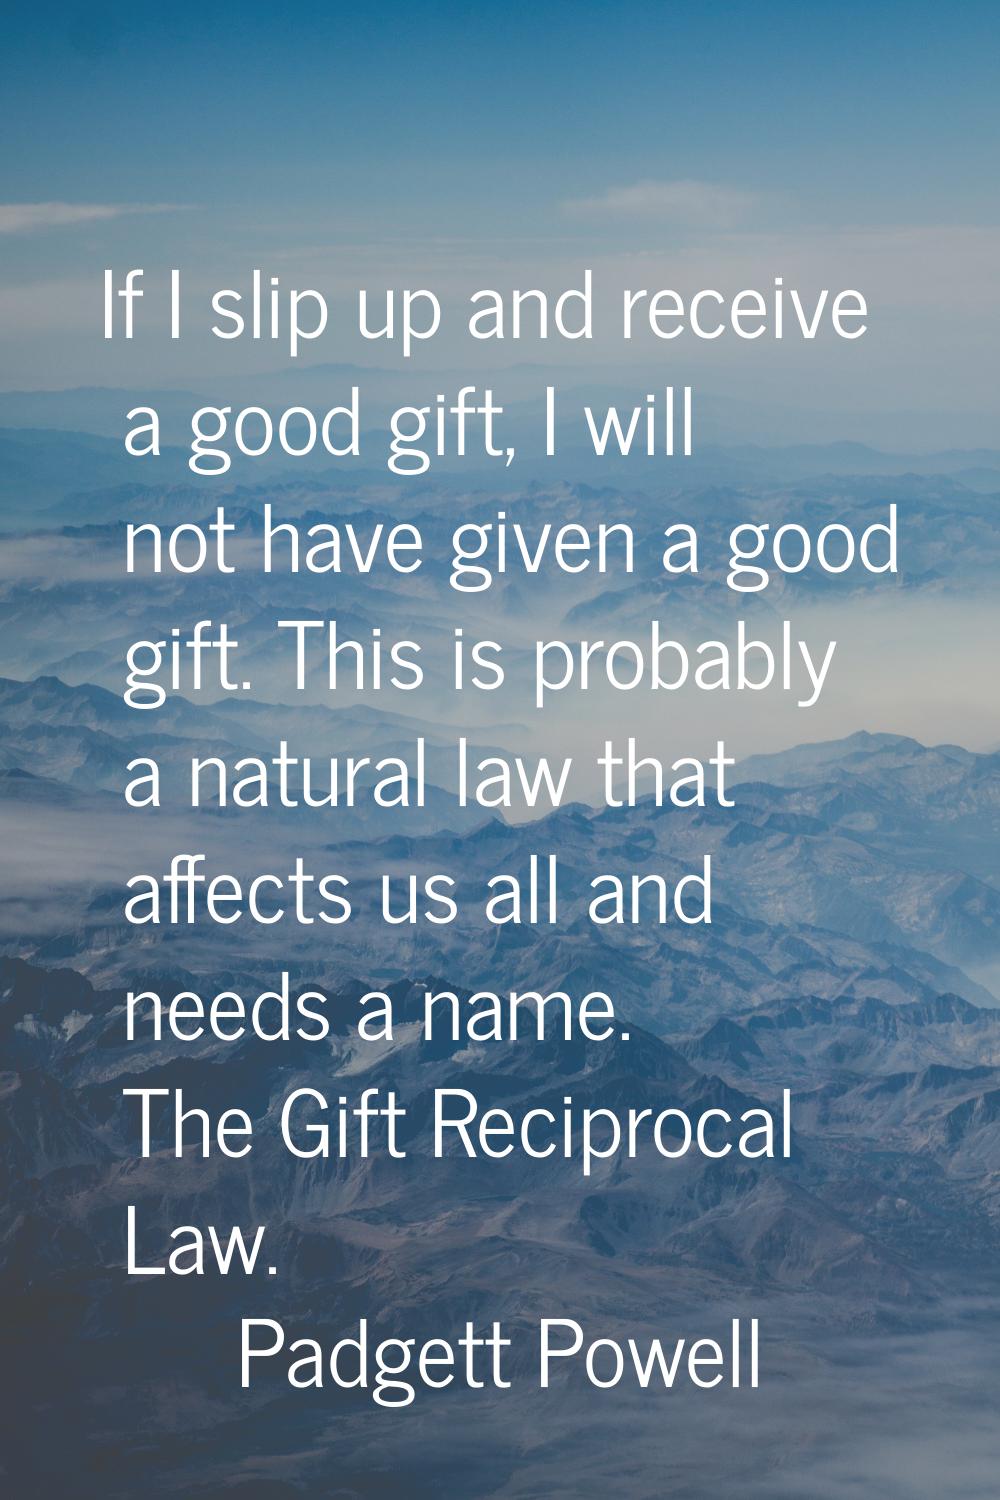 If I slip up and receive a good gift, I will not have given a good gift. This is probably a natural